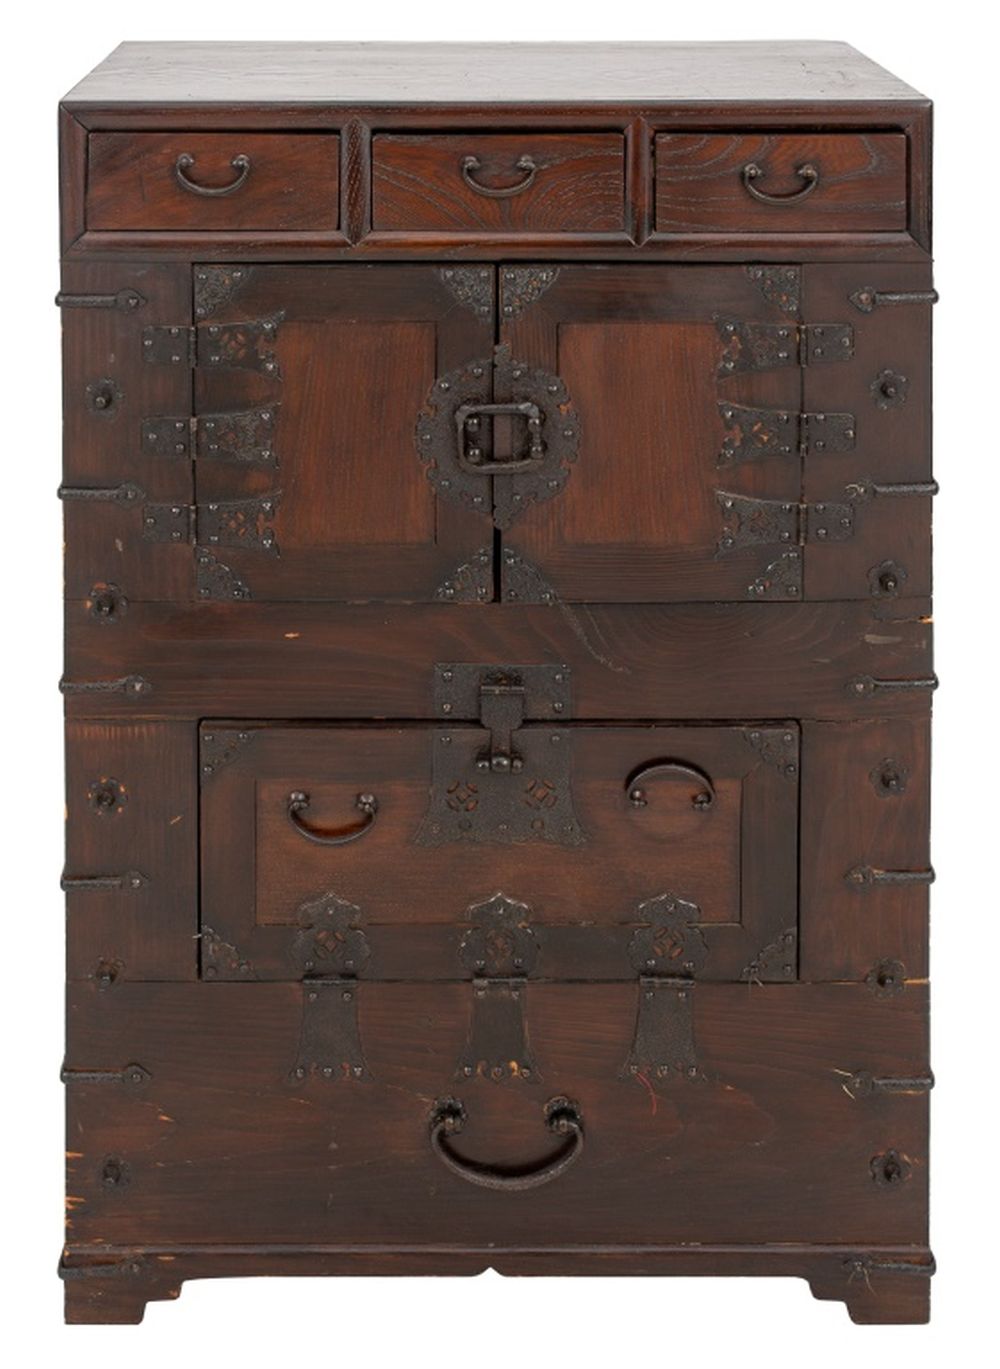 CHINESE ELM WOOD CHEST Chinese